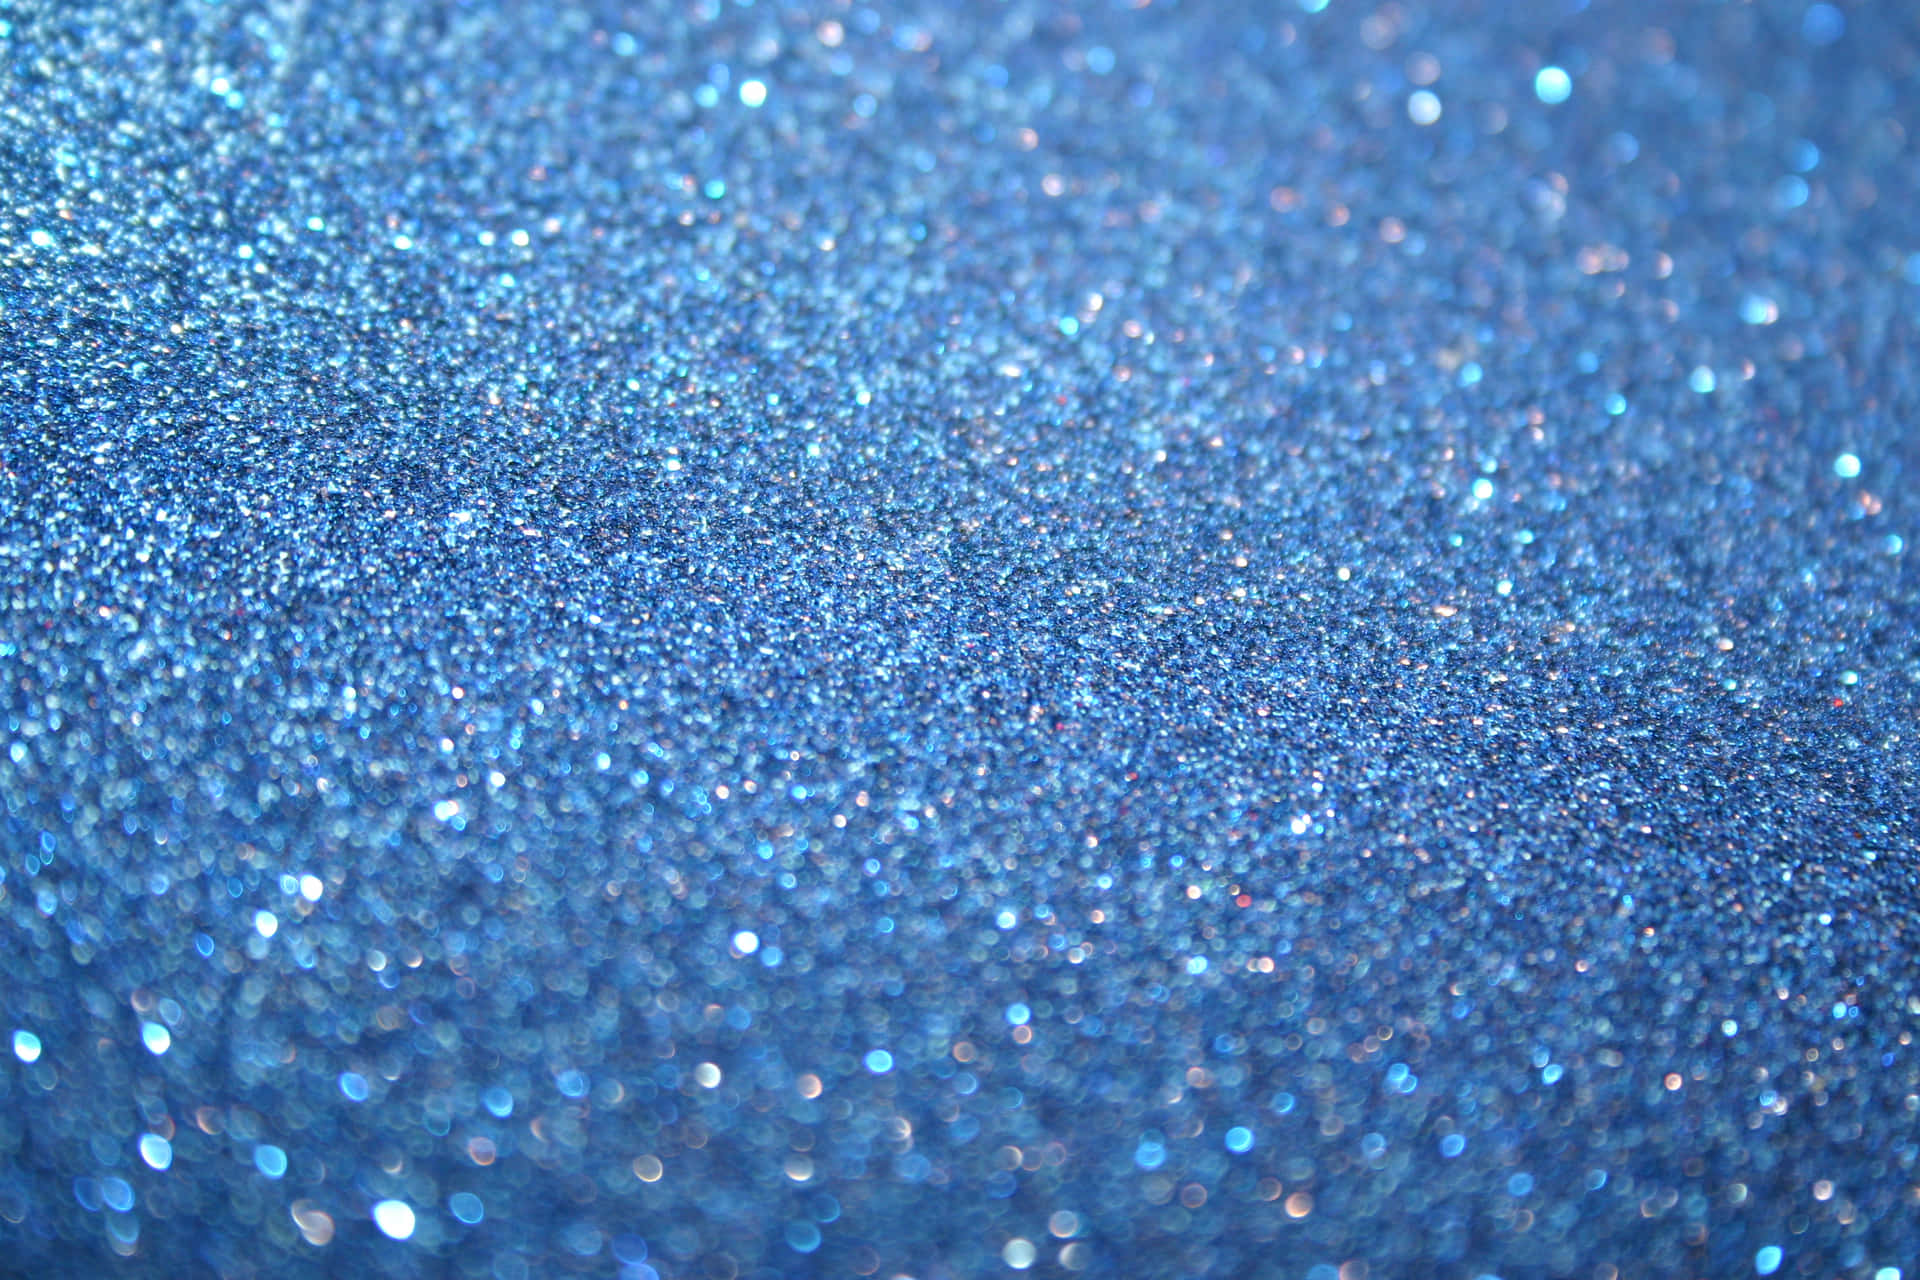 Add a touch of sparkle to your life with a stunning Blue Sparkle Background